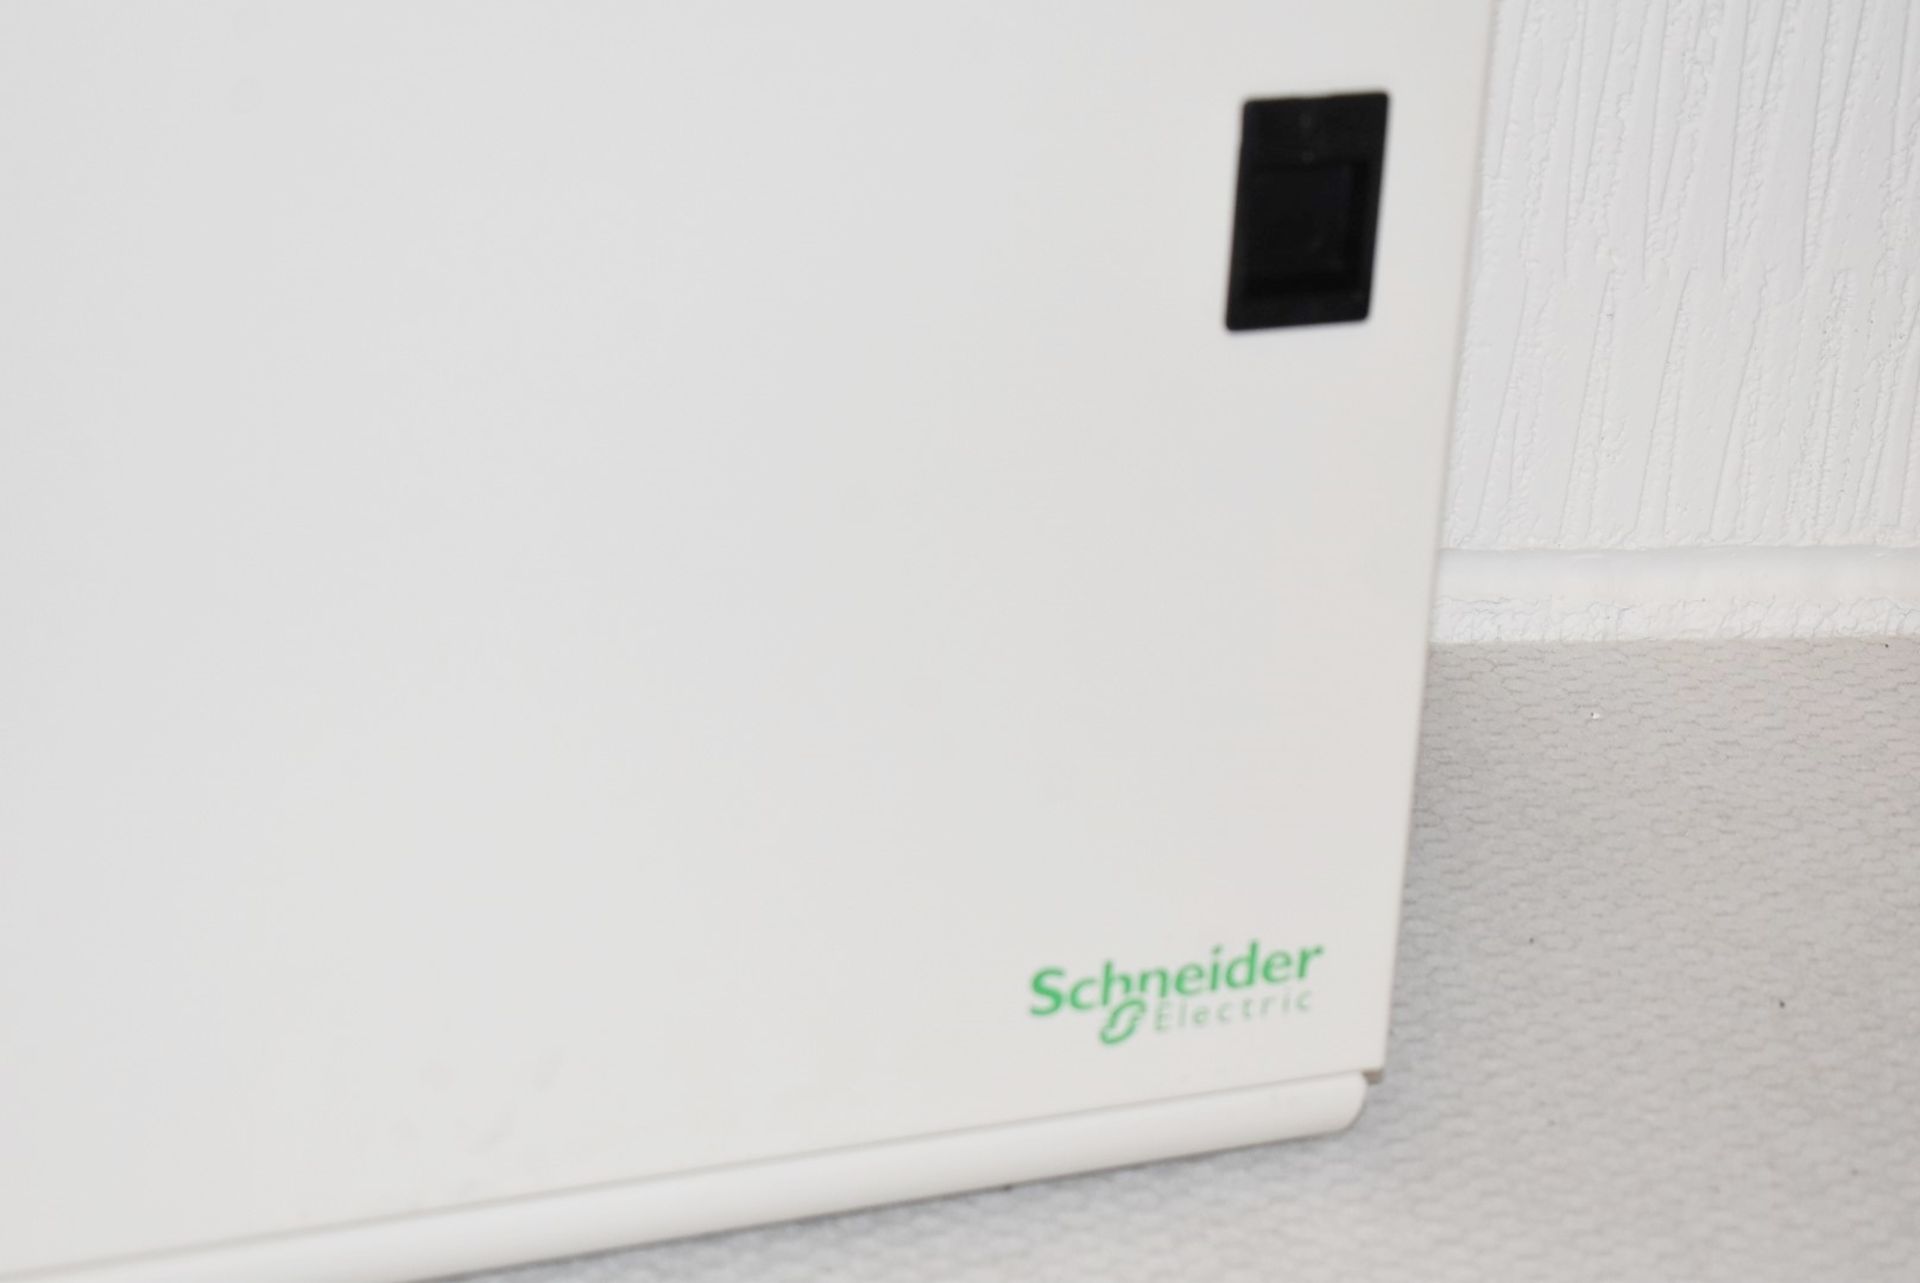 1 x Schneider Acti 9 Isobar Fuse Box - Unused - Size W47 x H47 cms - CL717 - Ref: GCA250 WH5 - - Image 4 of 8